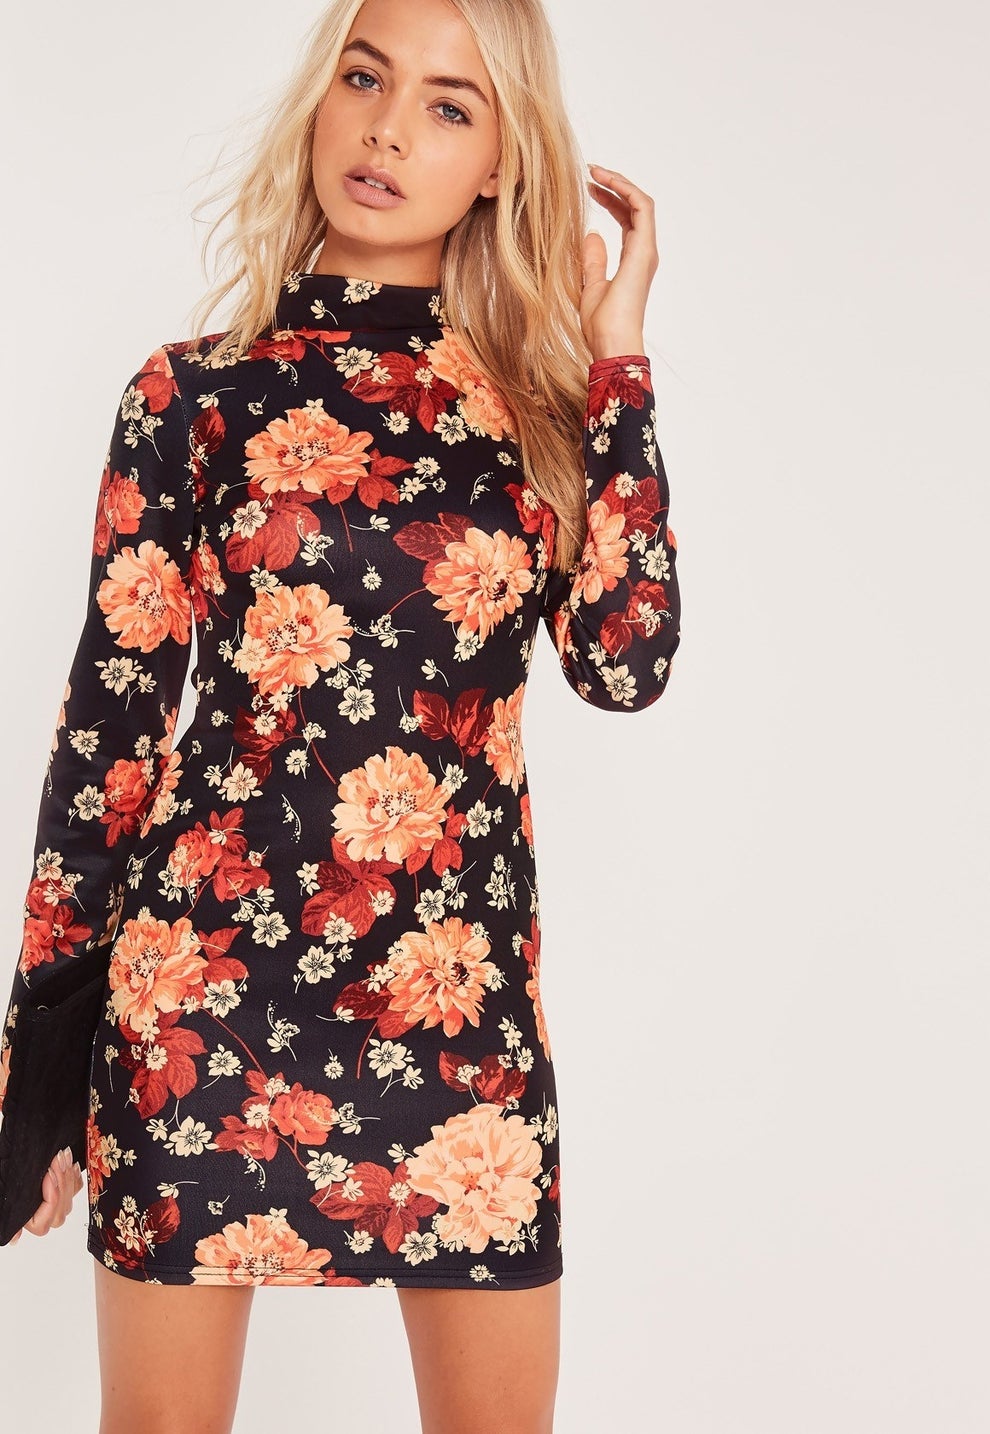 26 Beautiful Dresses Under $30 To Wear To Any Fall Wedding